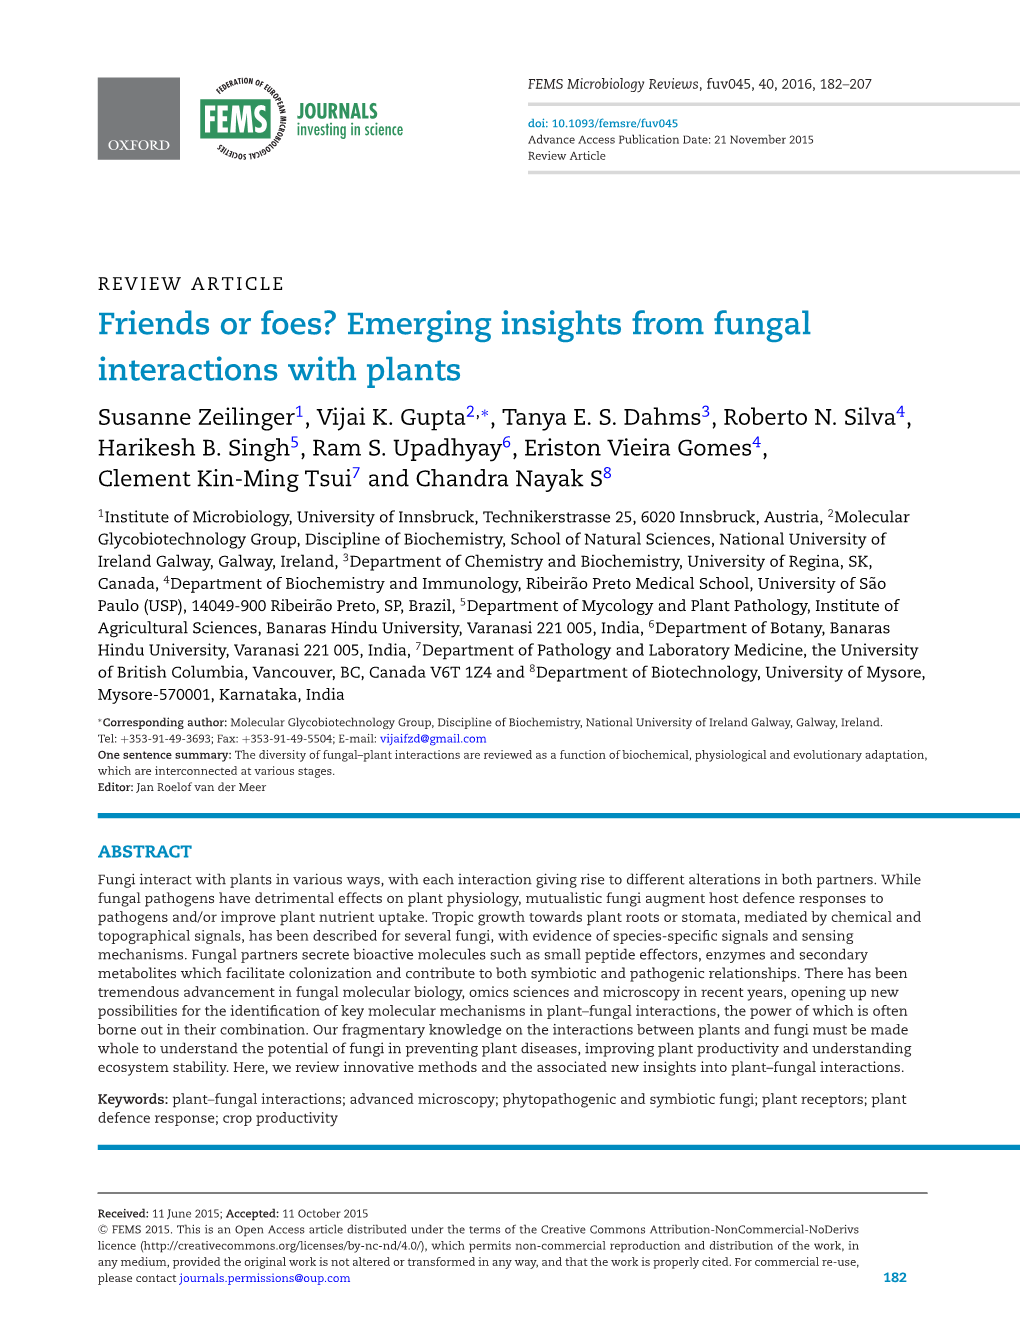 Friends Or Foes? Emerging Insights from Fungal Interactions with Plants Susanne Zeilinger1,Vijaik.Gupta2,∗, Tanya E